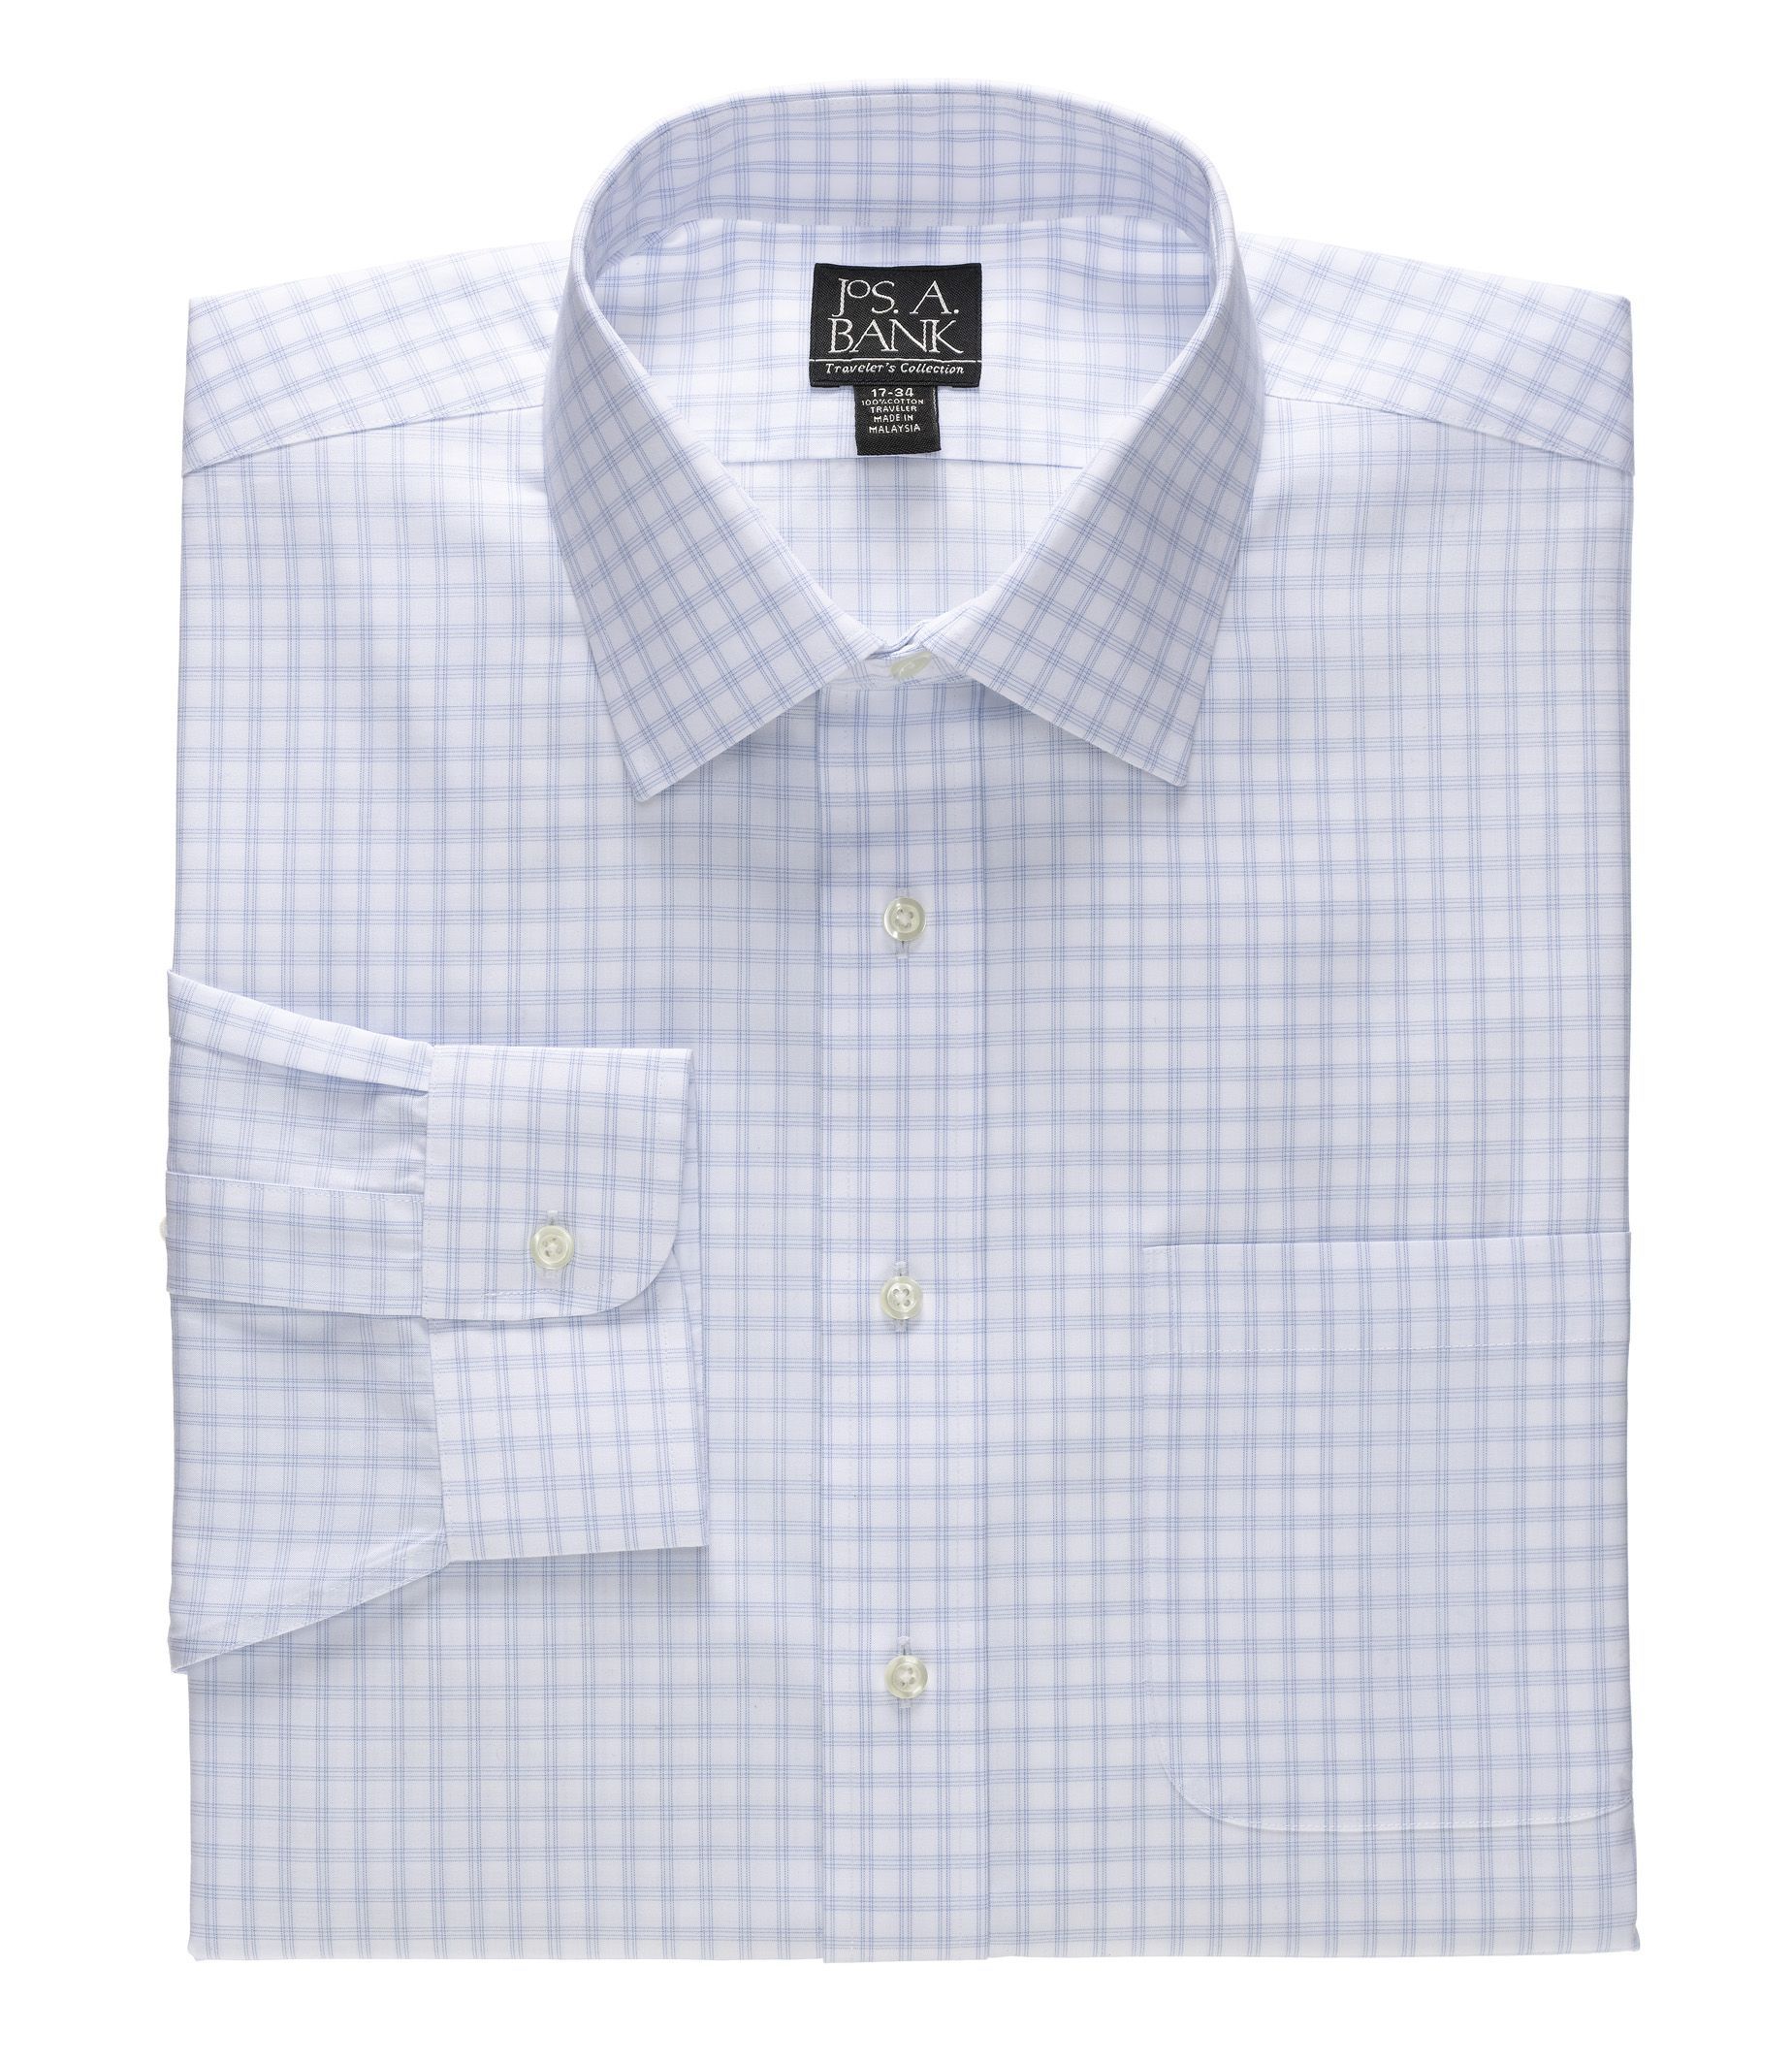 Image of JoS. A. Bank Men's Traveler Collection Tailored Fit Spread Collar Grid Dress Shirt - Big & Tall, Light Blue, 20-36